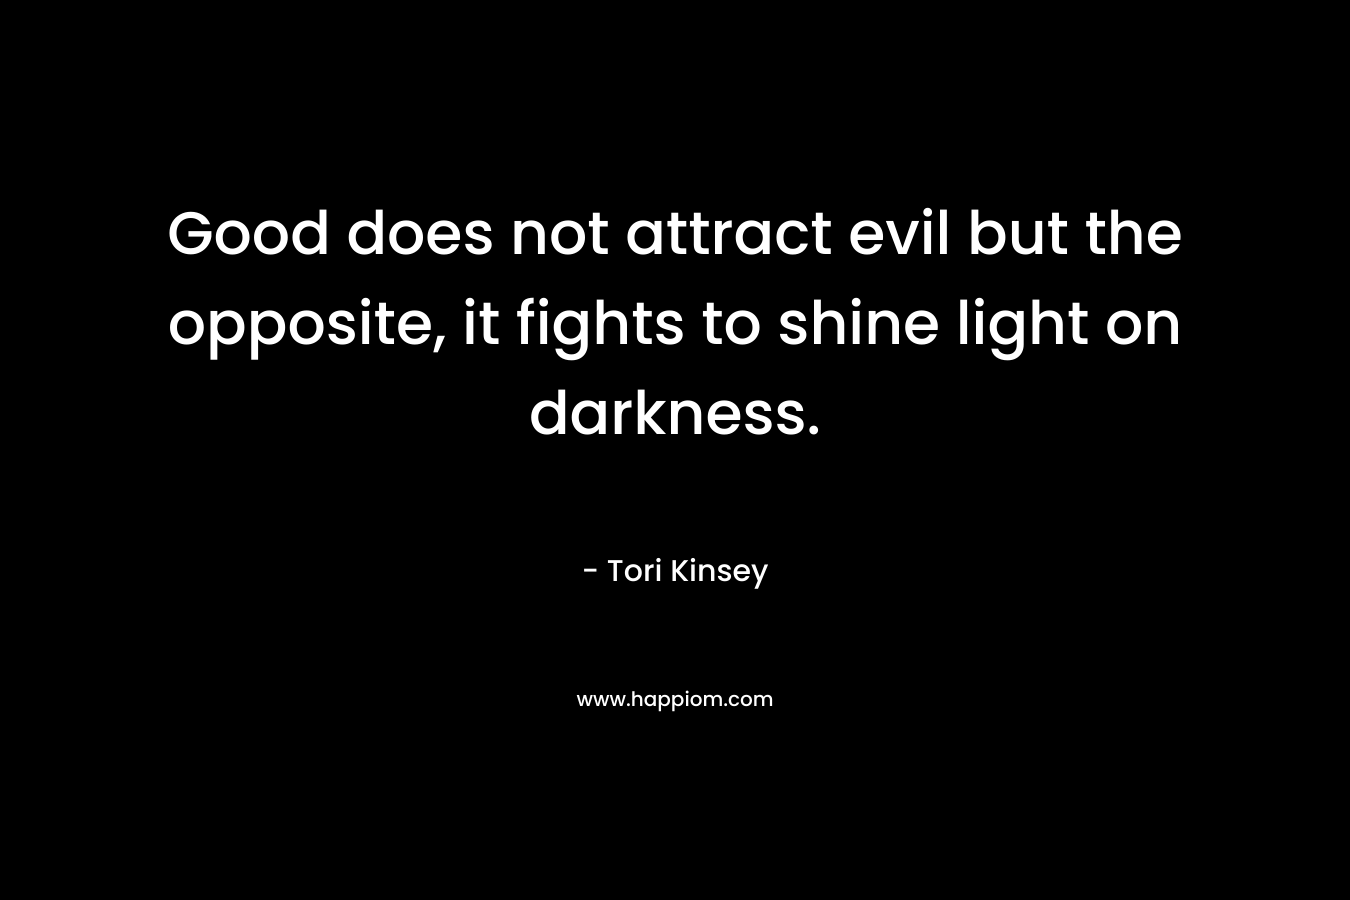 Good does not attract evil but the opposite, it fights to shine light on darkness. – Tori Kinsey